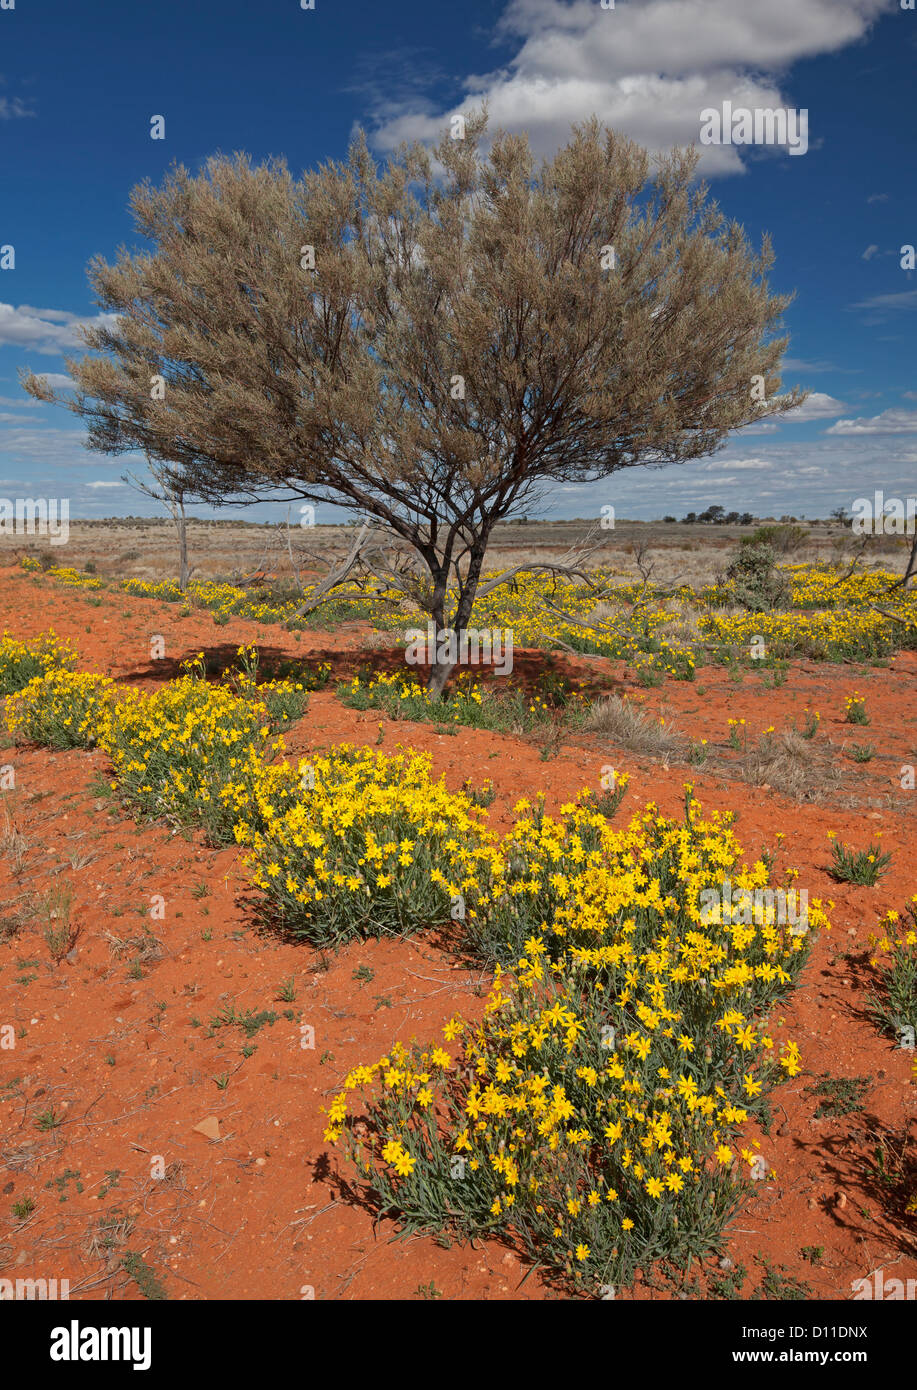 Landscape in outback Australia with yellow wildflowers, Senecio species, and solitary mulga / acacia tree on vast plains Stock Photo